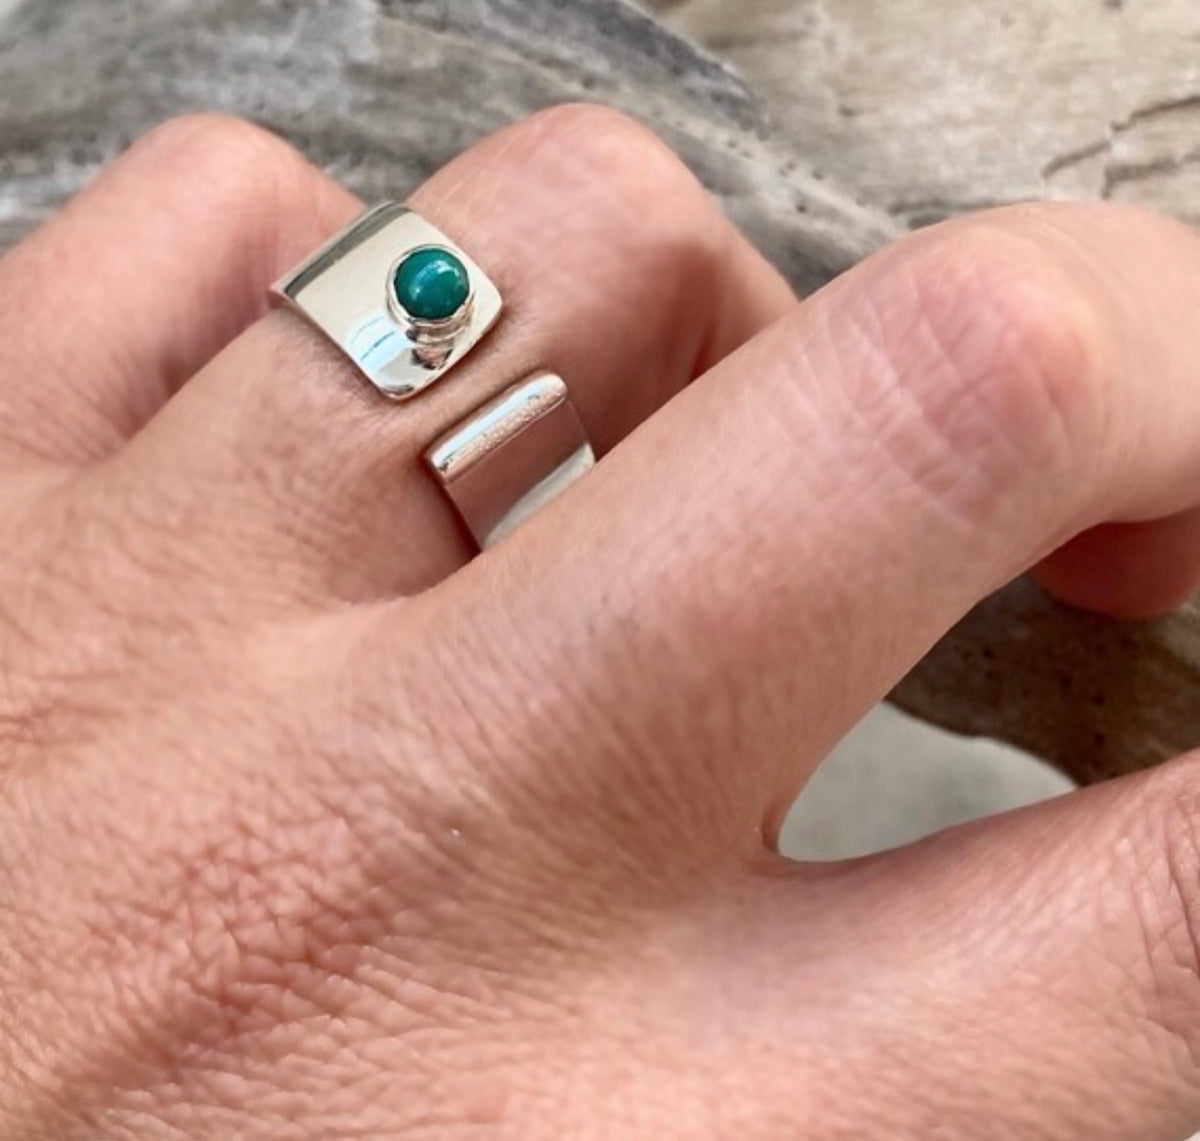 Silver ring with turquoise gemstone, adjustable ring